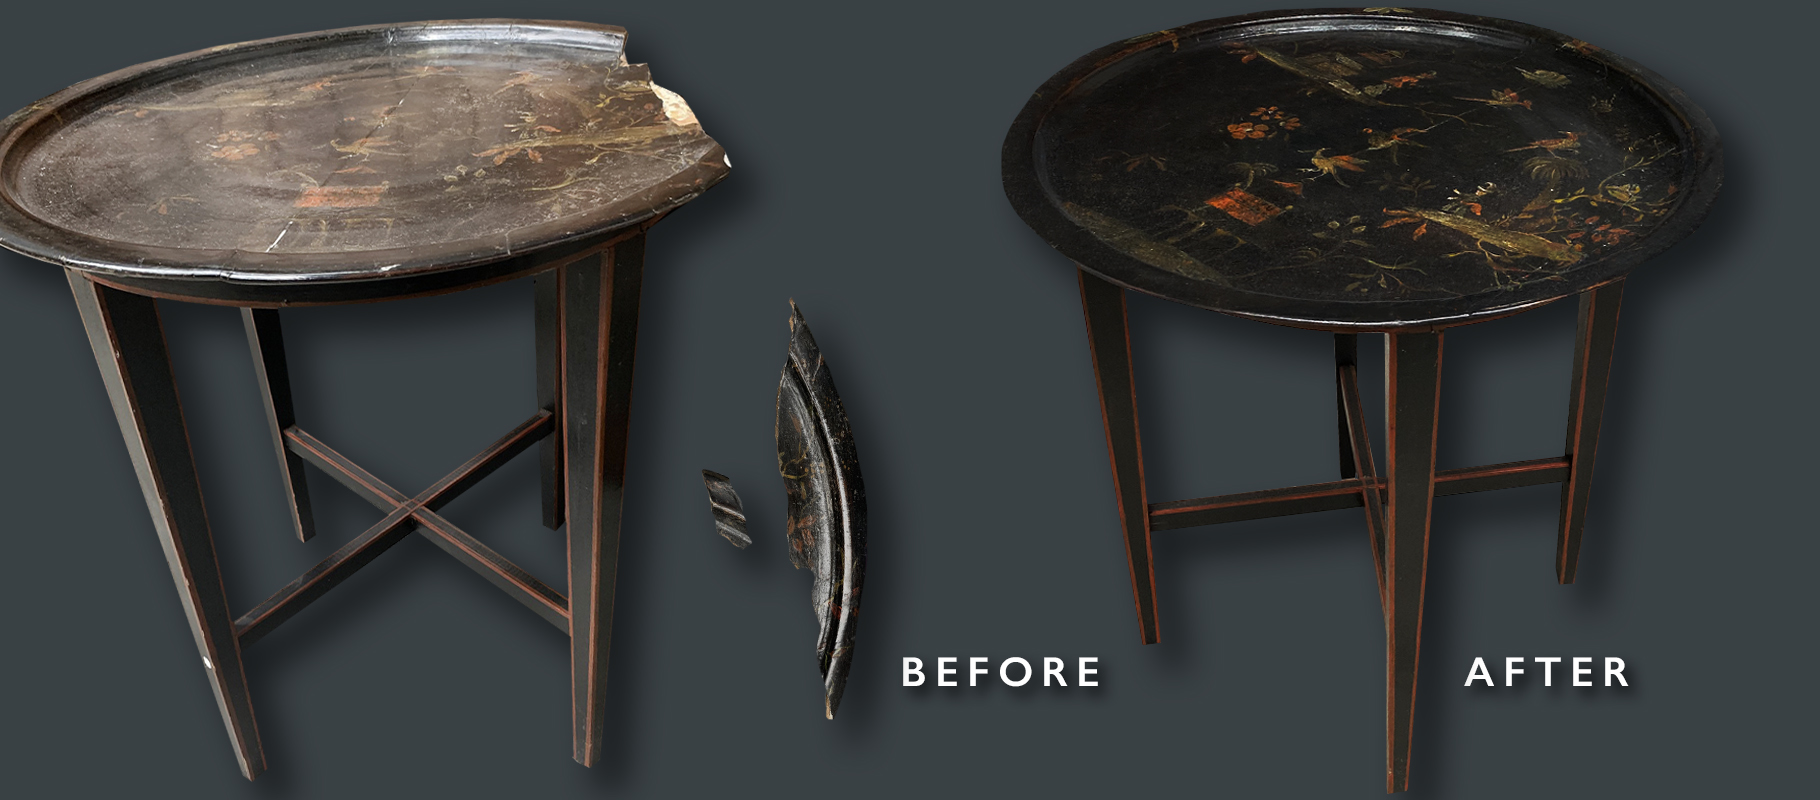 Japanese Lacquerware side table before and after restoration